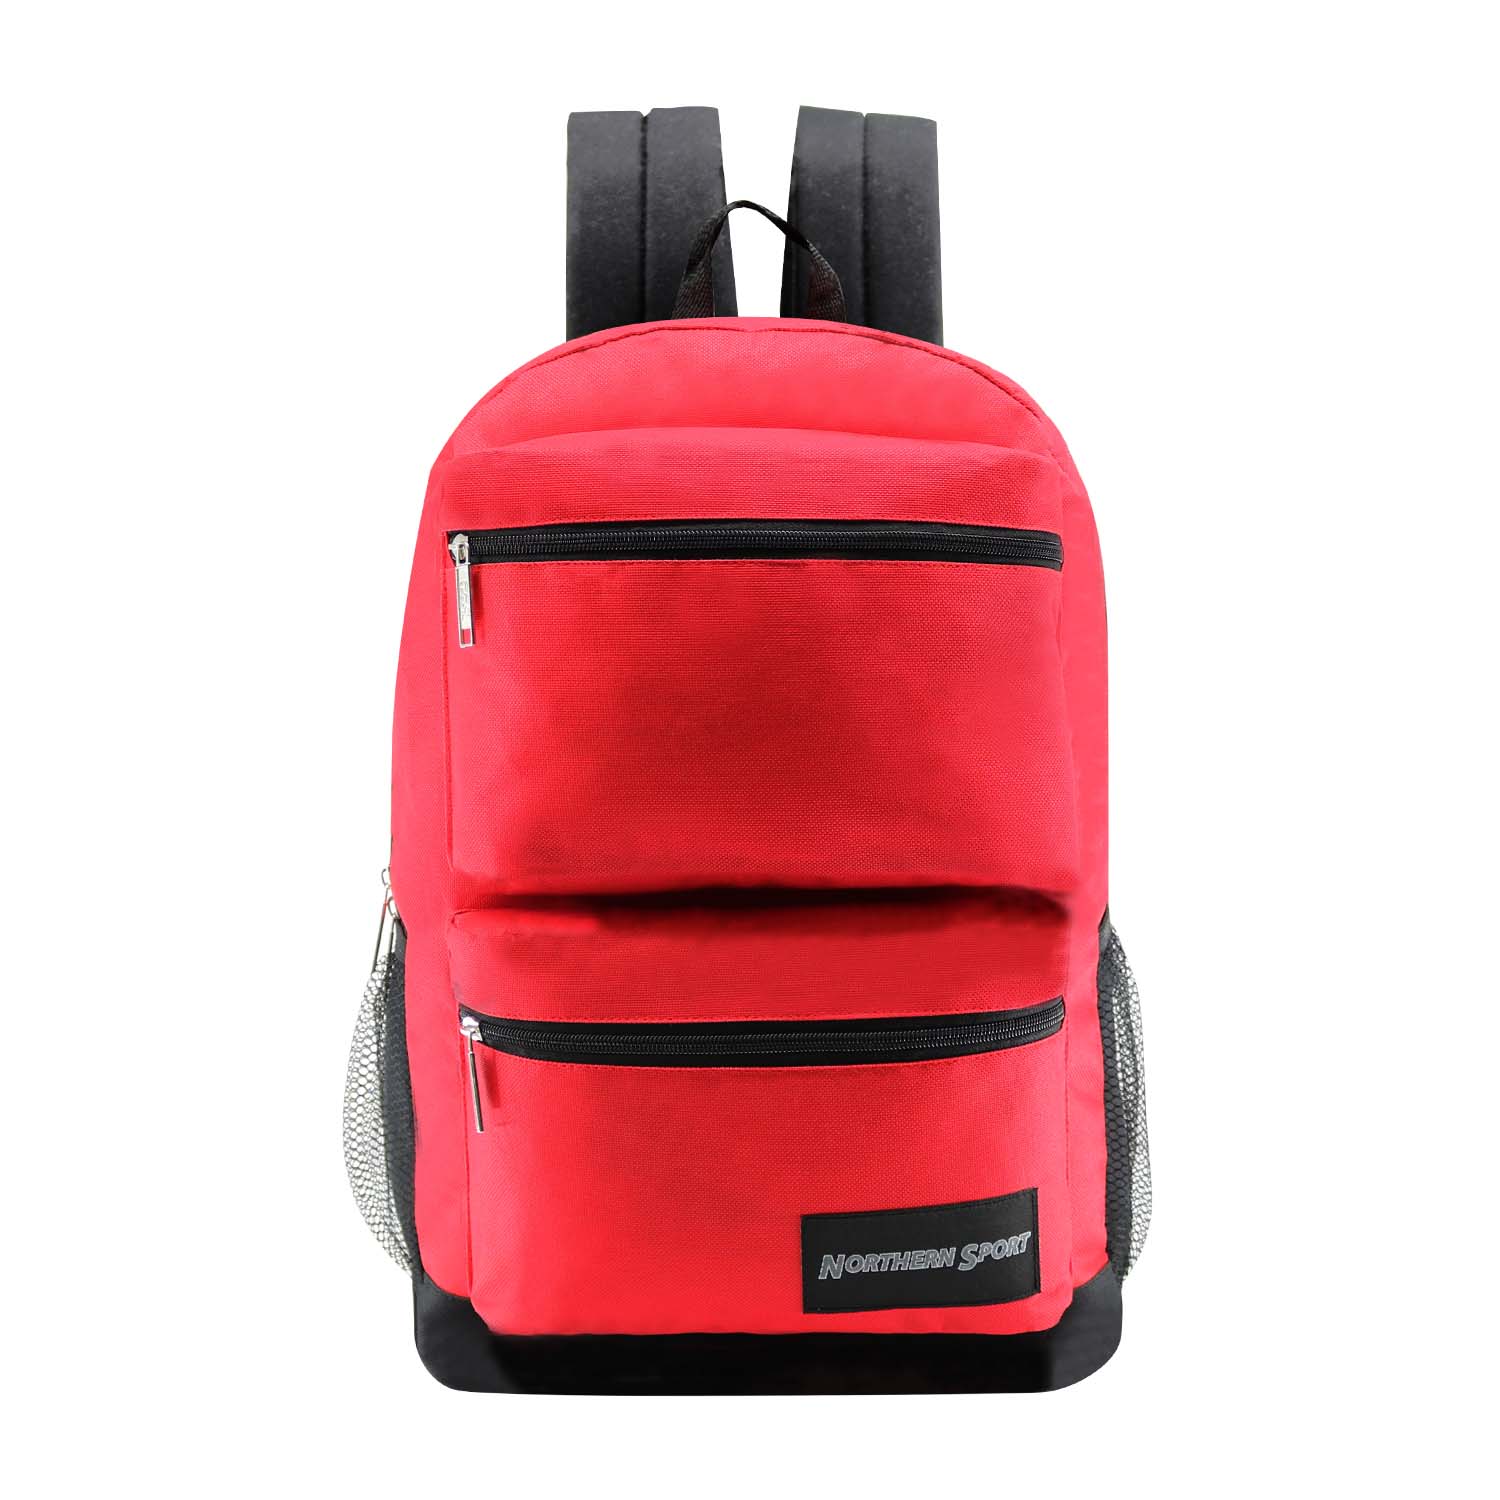 17" Deluxe Wholesale Backpack in Assorted Colors- Bulk Case of 24